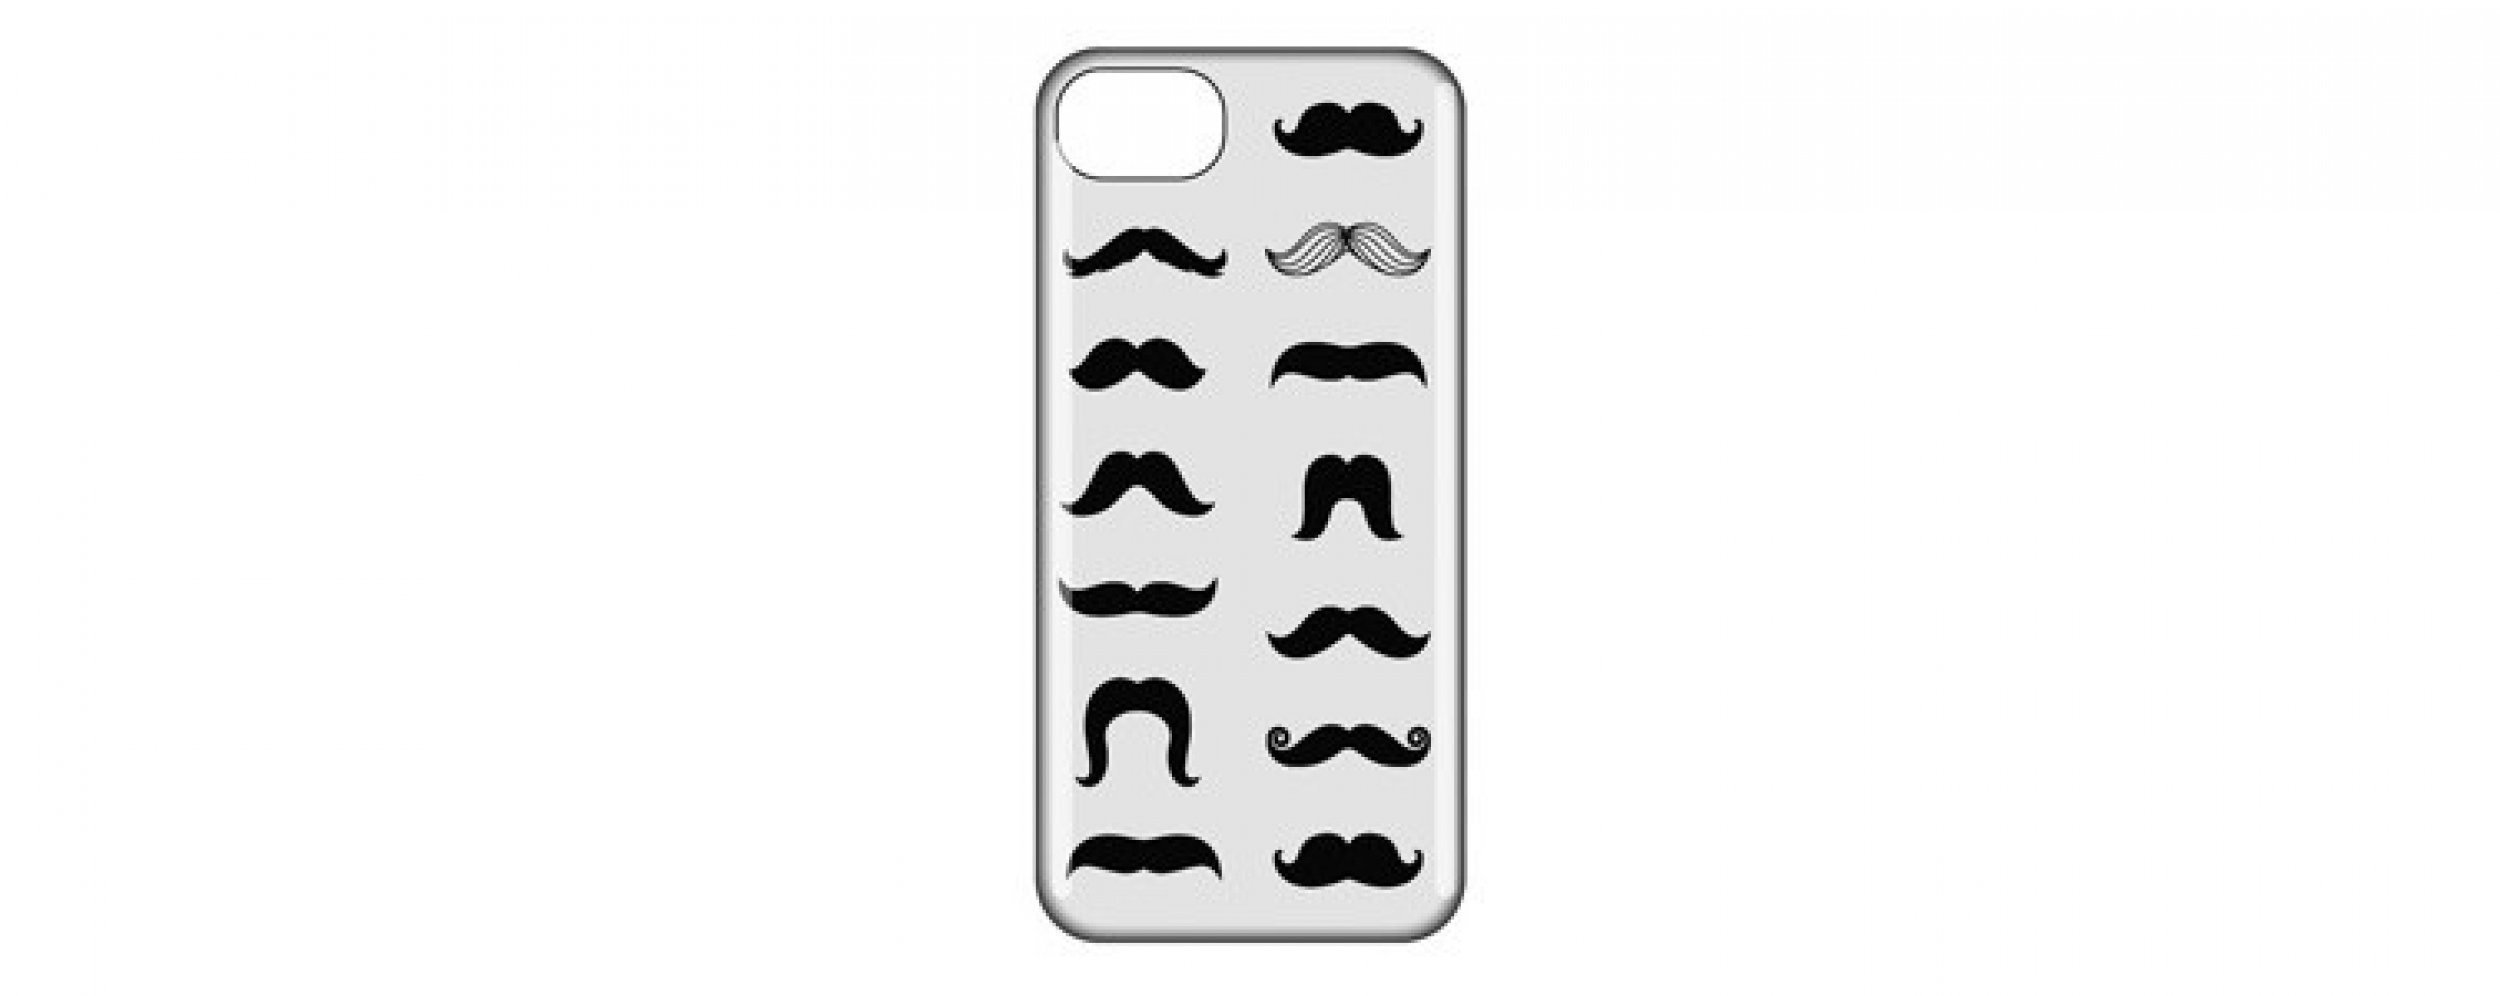 6. Mustachio Case for iPhone 5 -Available for 24.99 